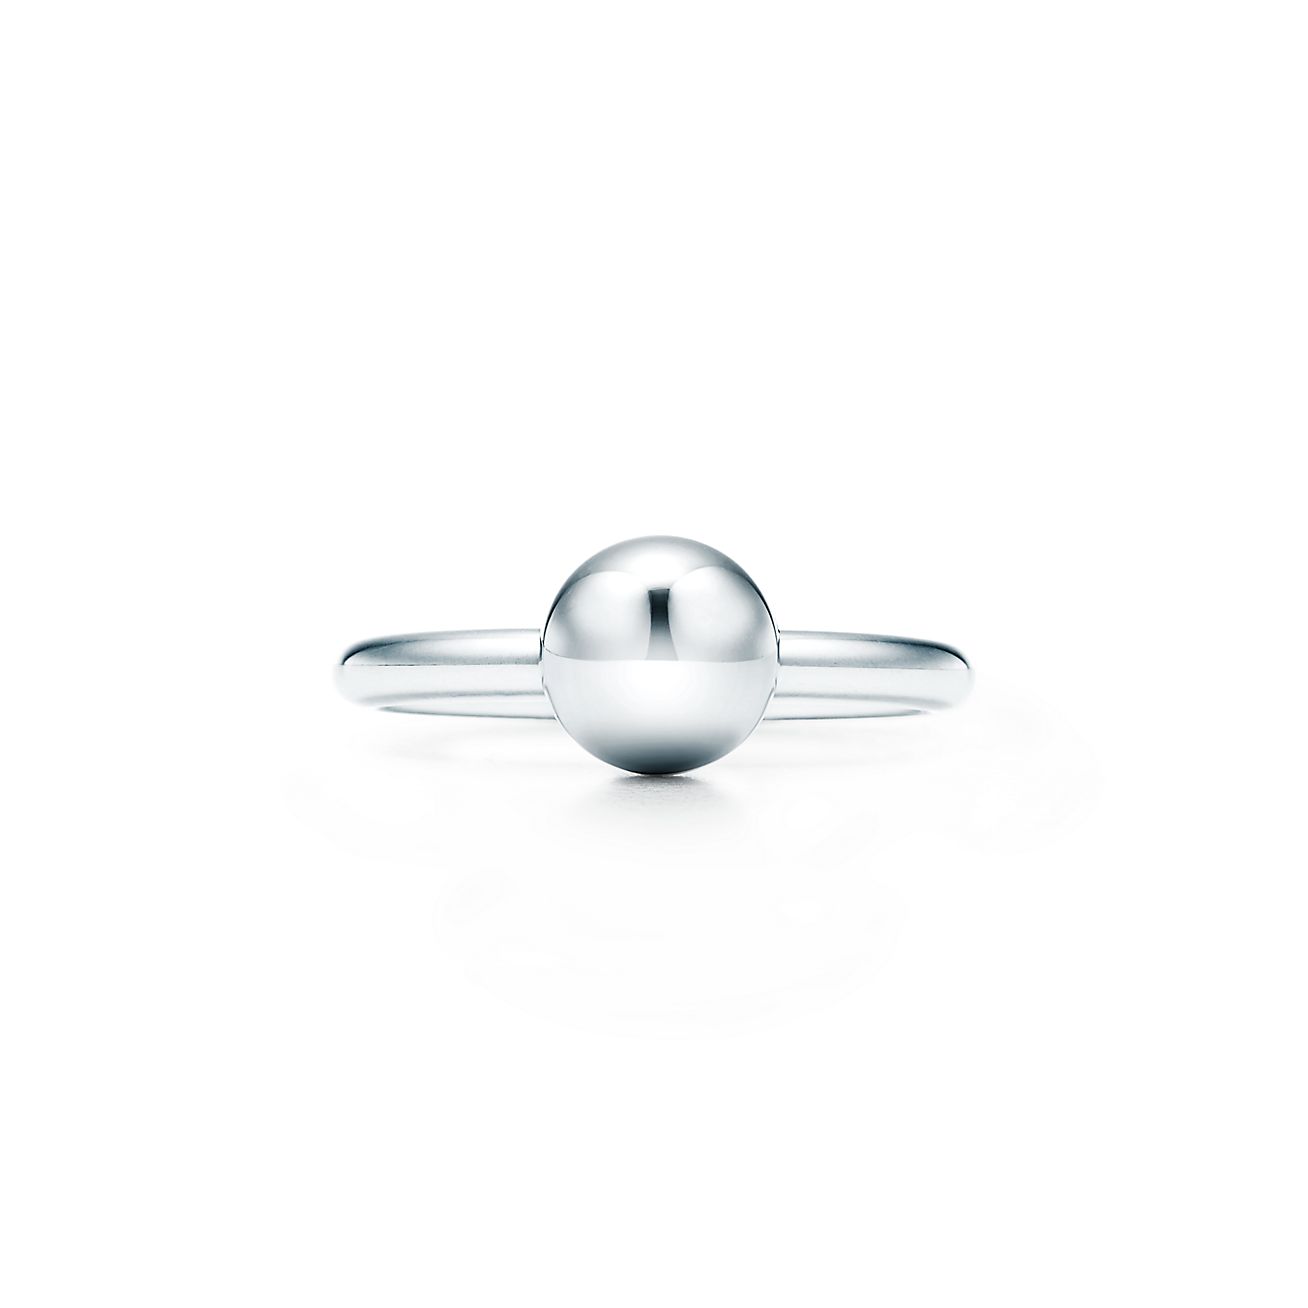 tiffany and co ball ring